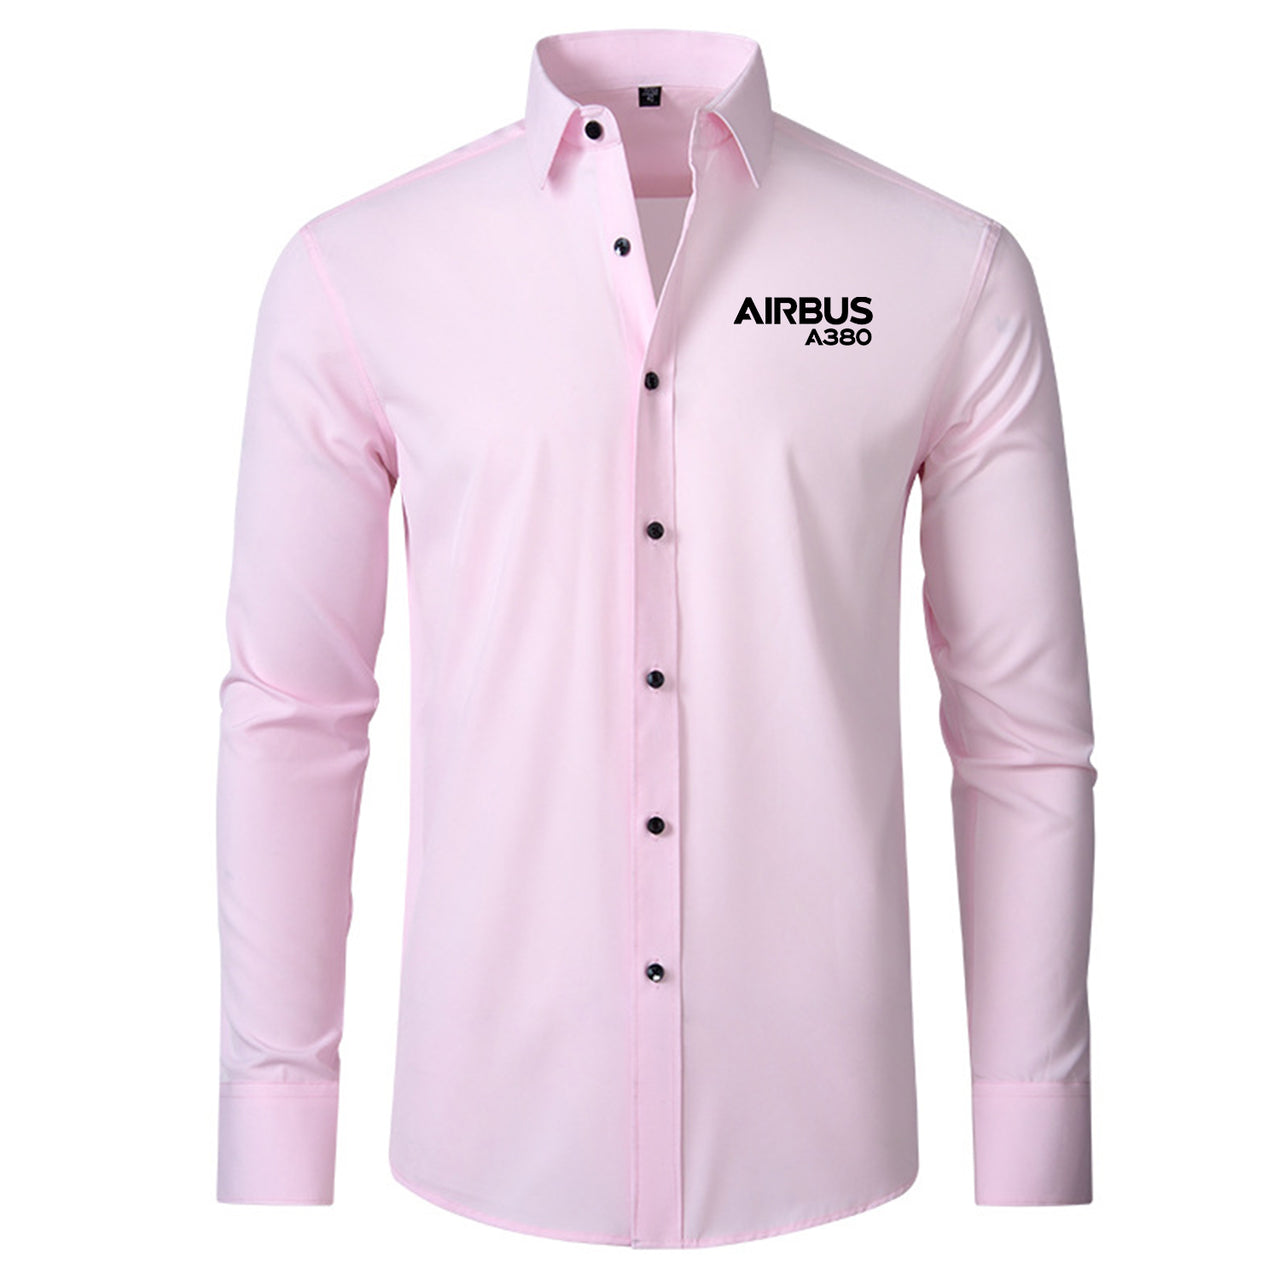 Airbus A380 & Text Designed Long Sleeve Shirts